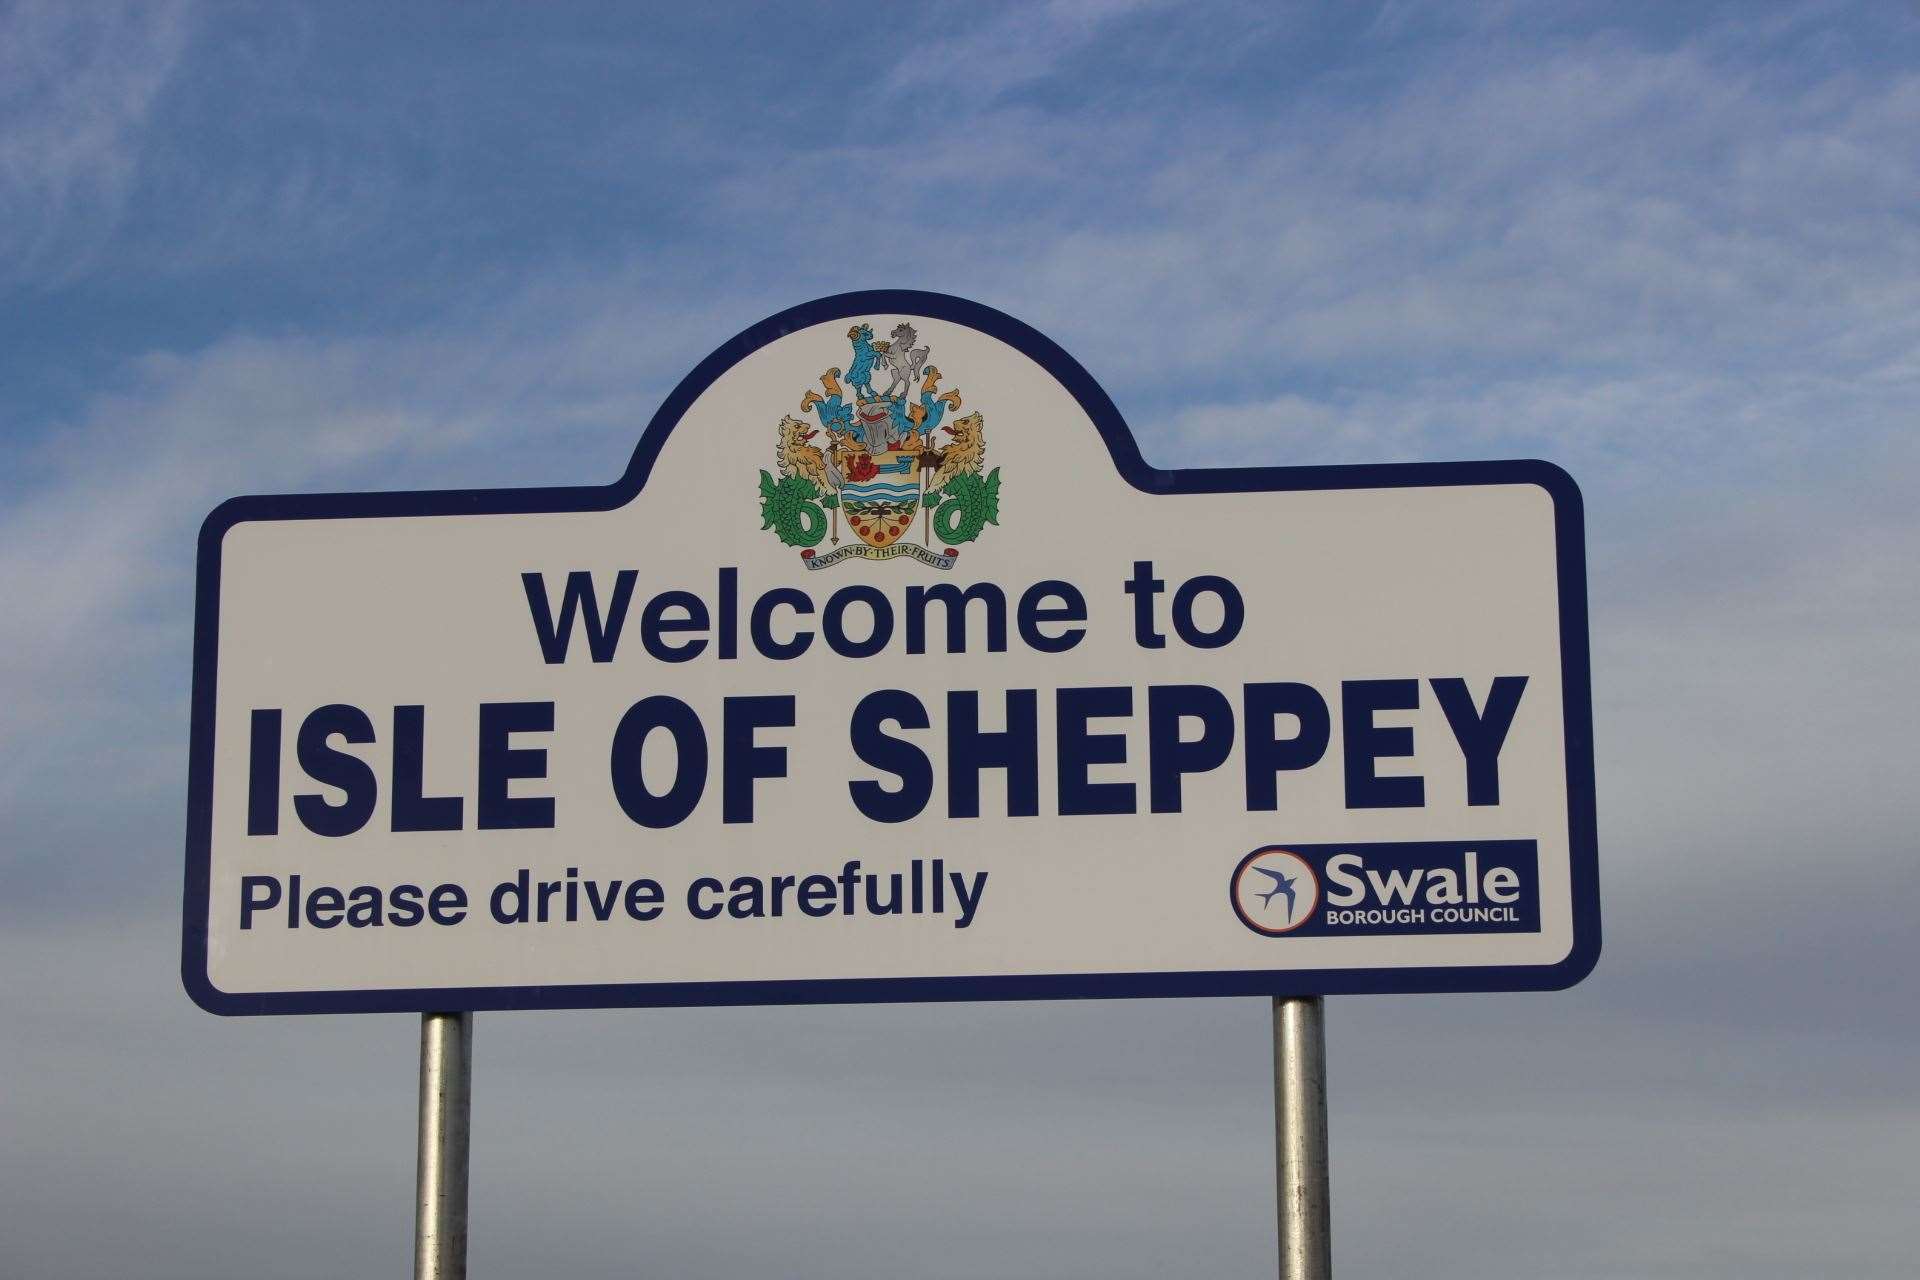 Welcome to the Isle of Sheppey